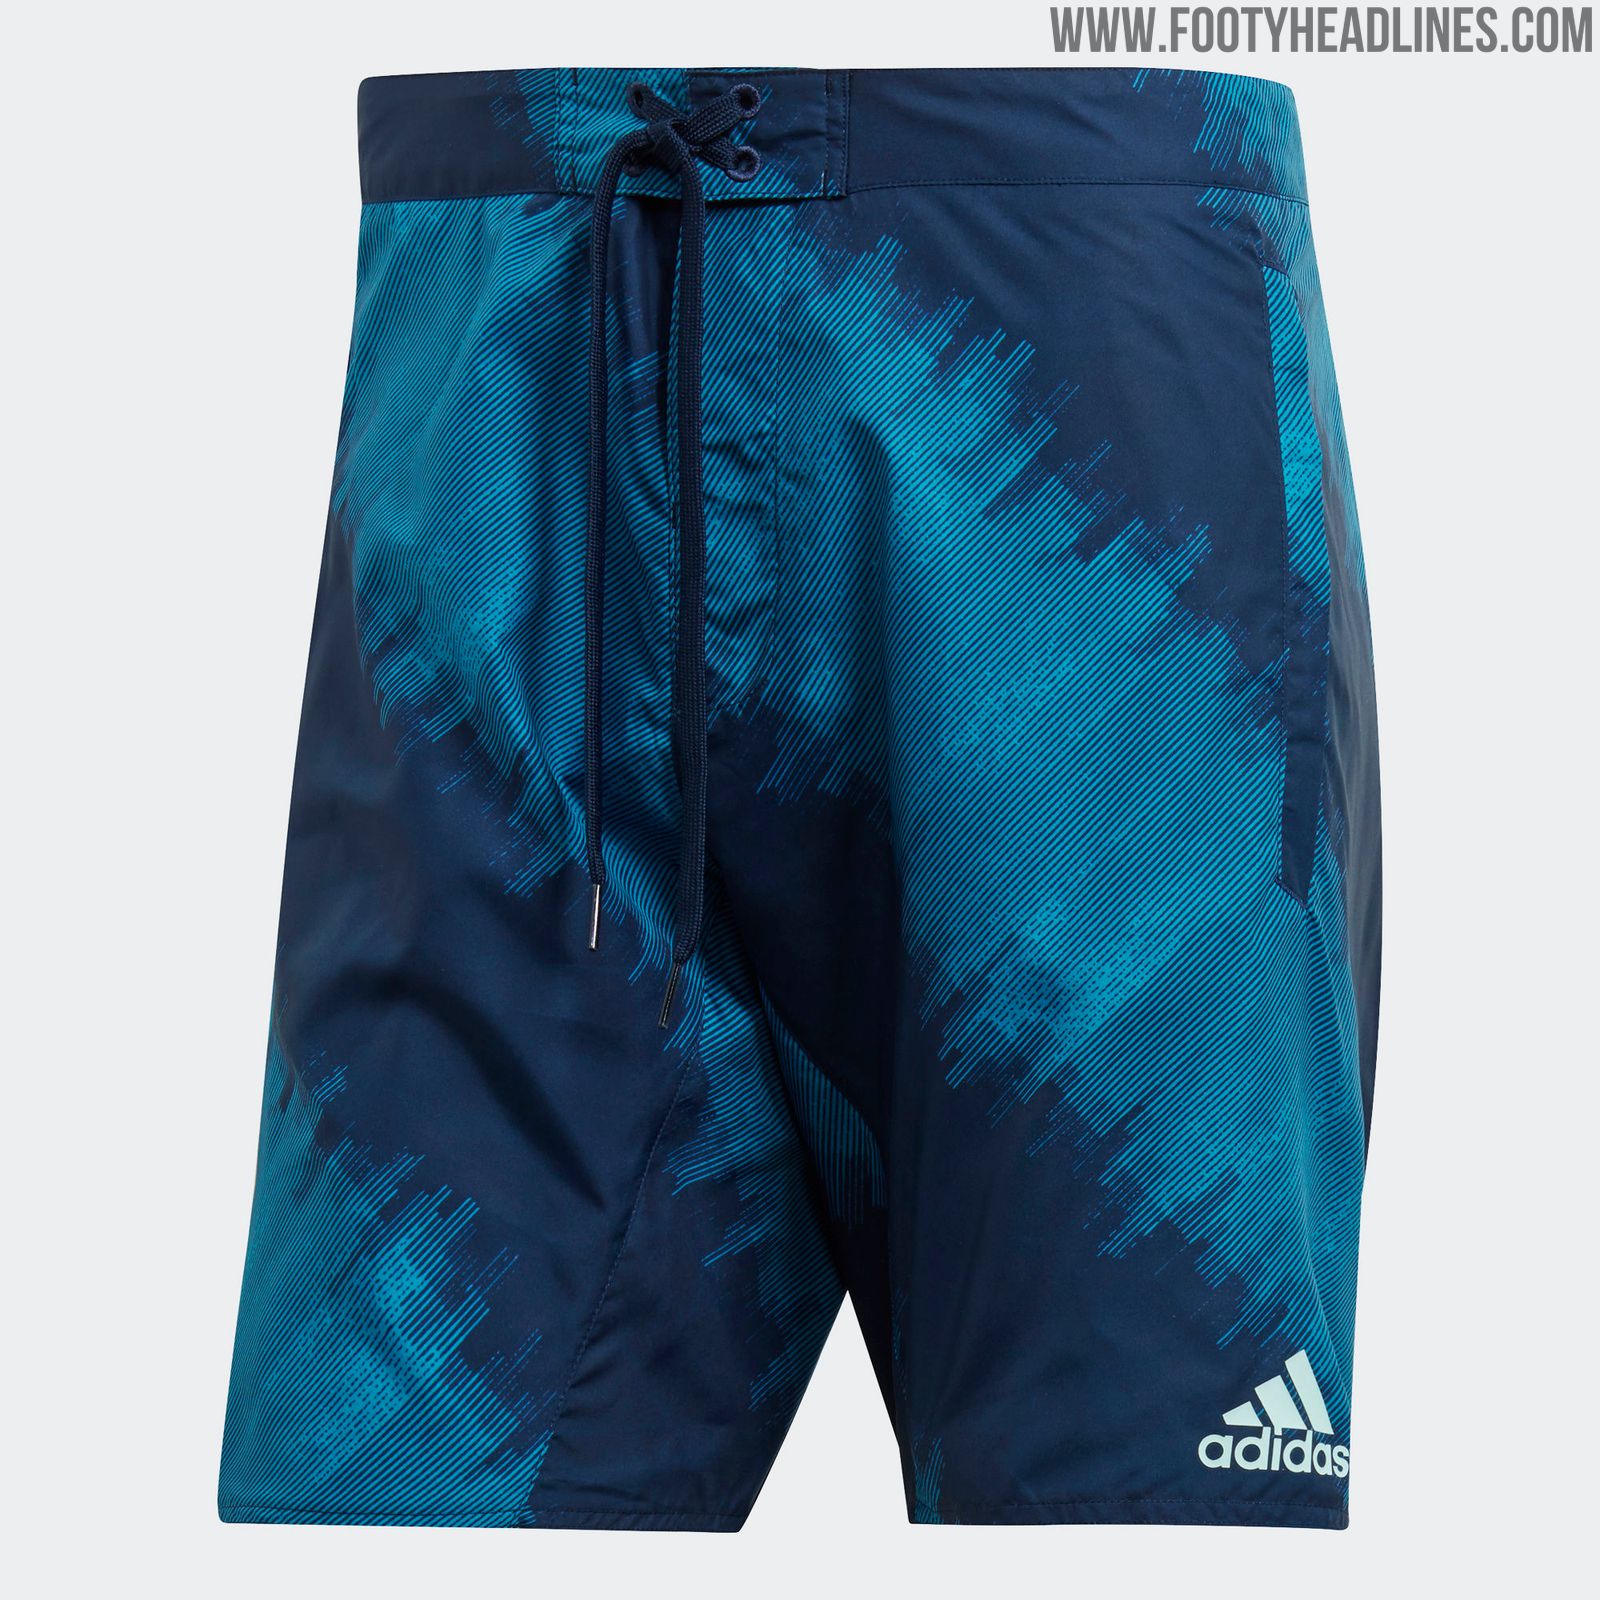 Gronden paar Lauw Adidas Launch Argentina and Mexico Board Shorts - Footy Headlines